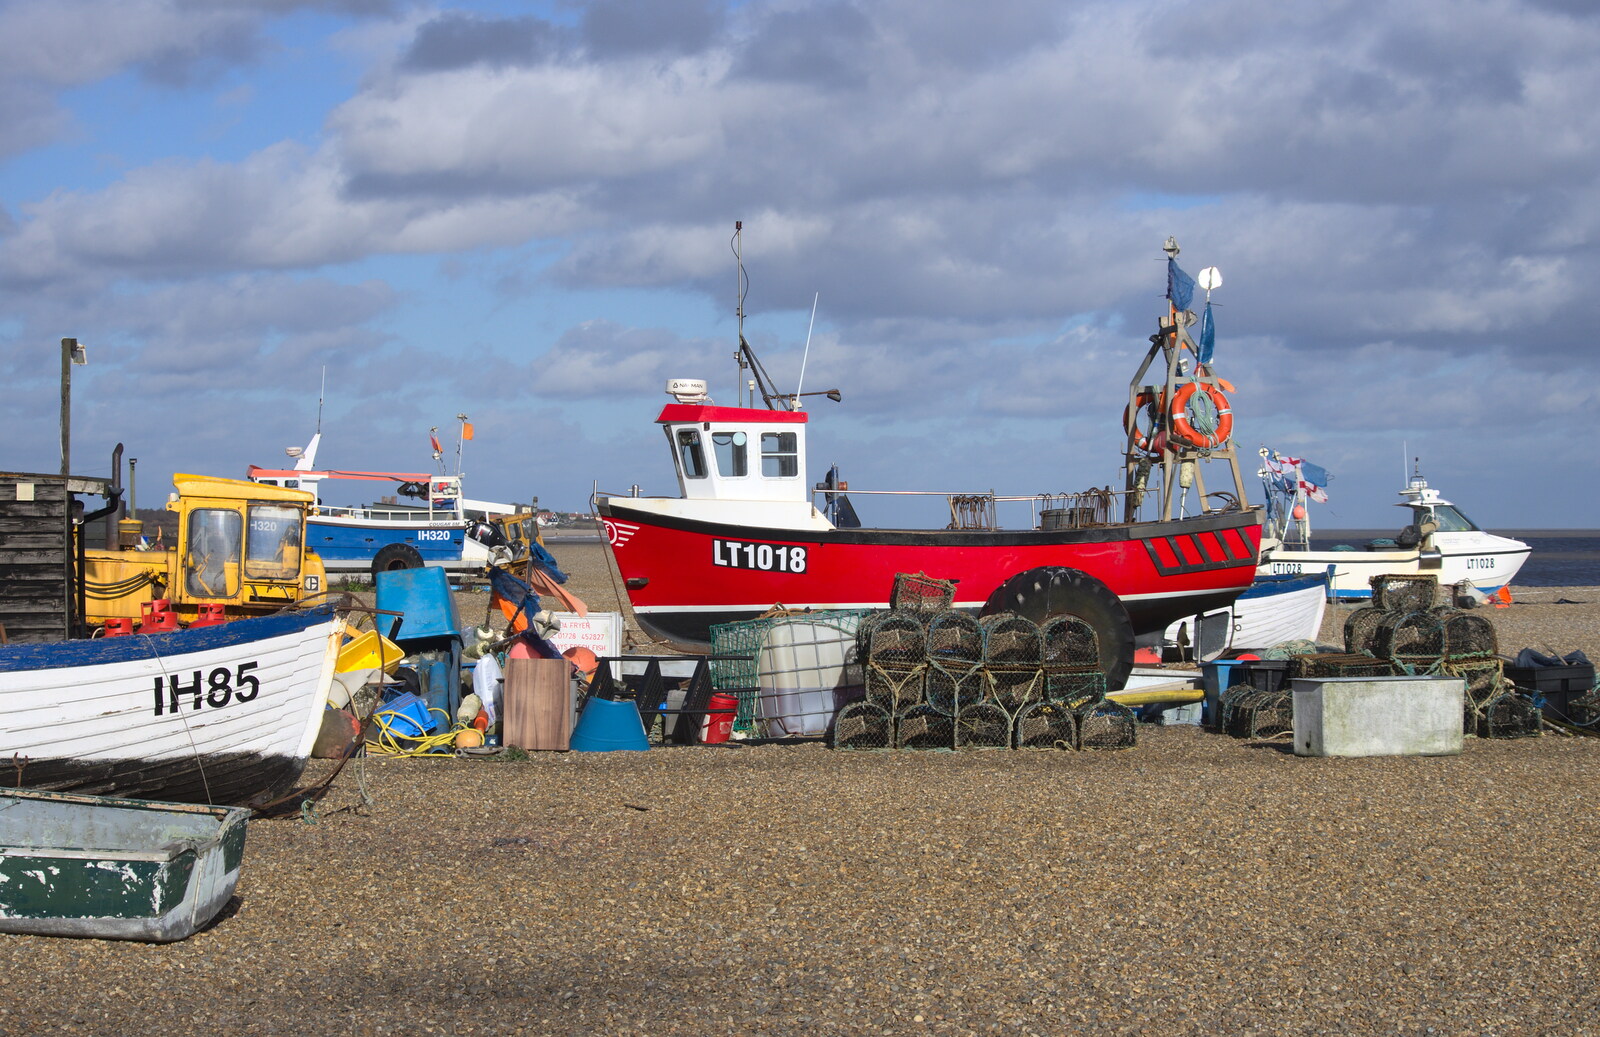 A Trip to Aldeburgh, Suffolk - 7th February 2016: Boats on the beach